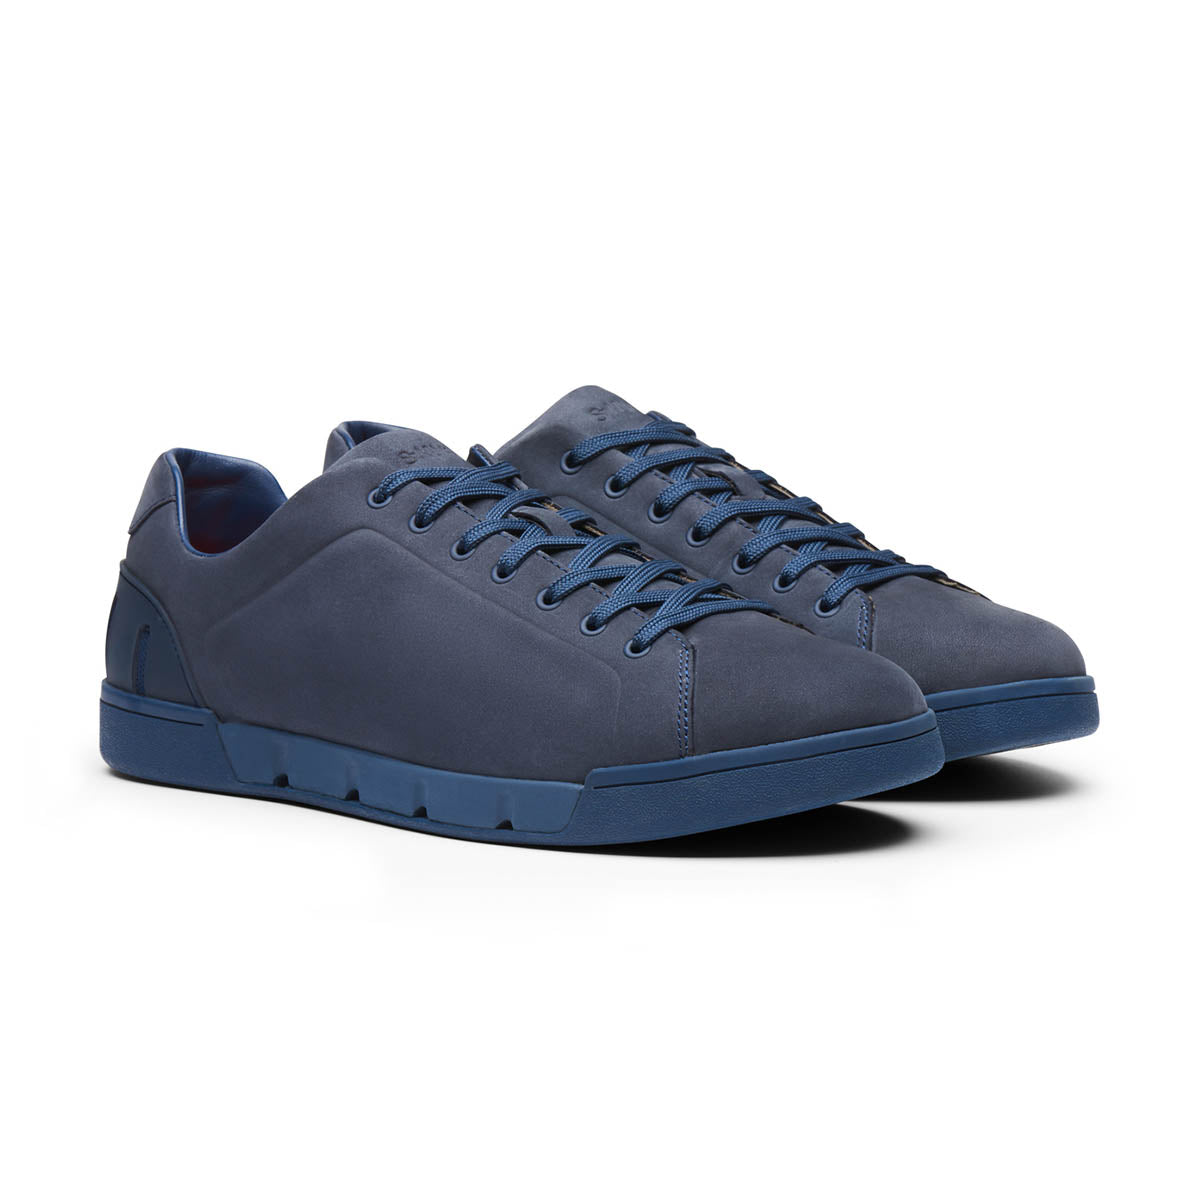 navy blue leather tennis shoes